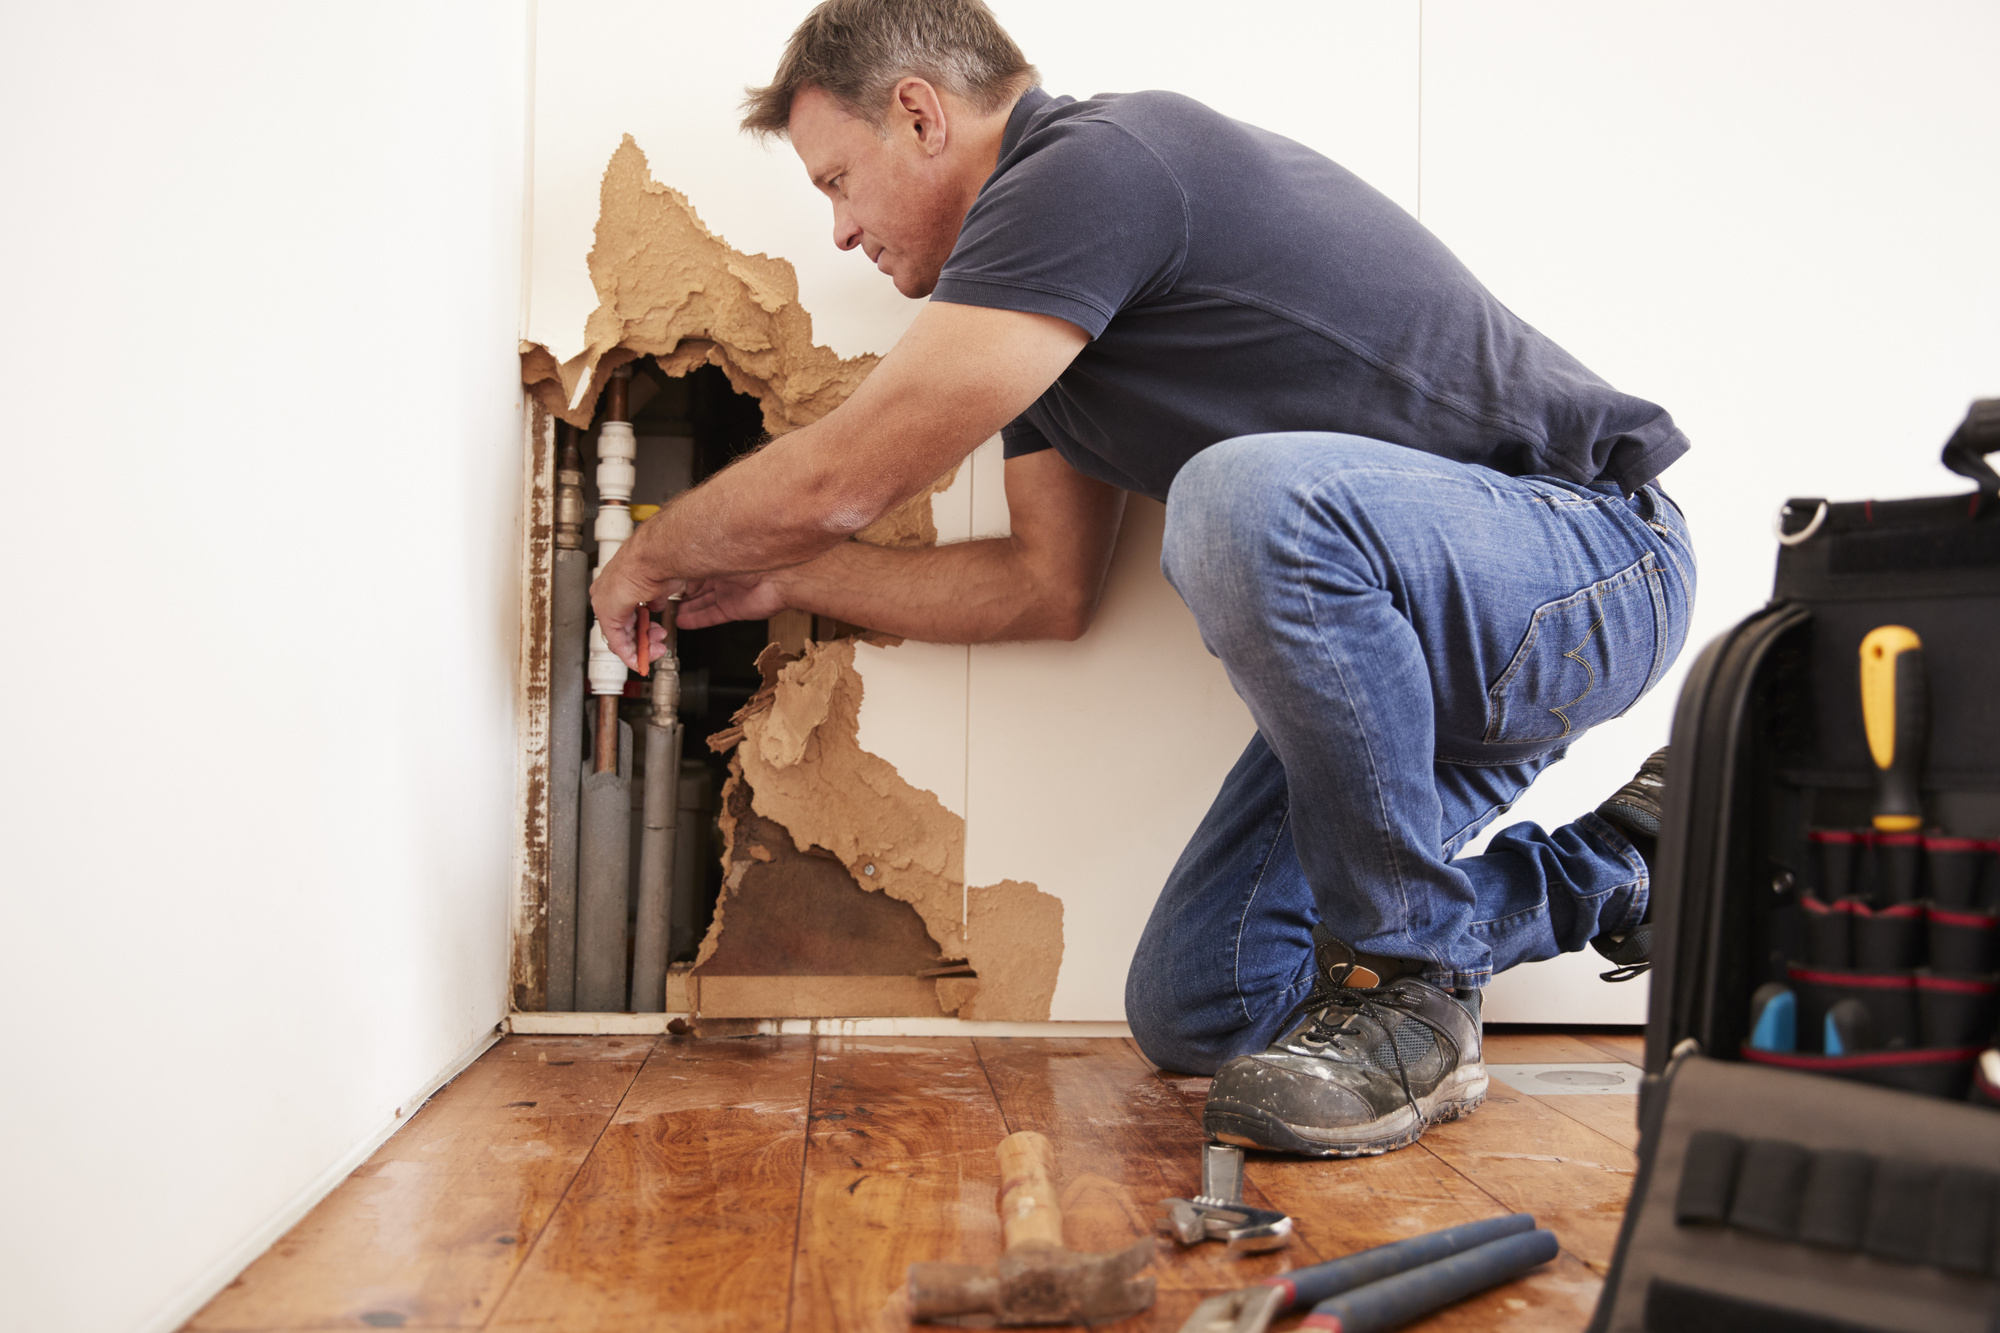 Water Damage Restoration Near Me: What To Expect